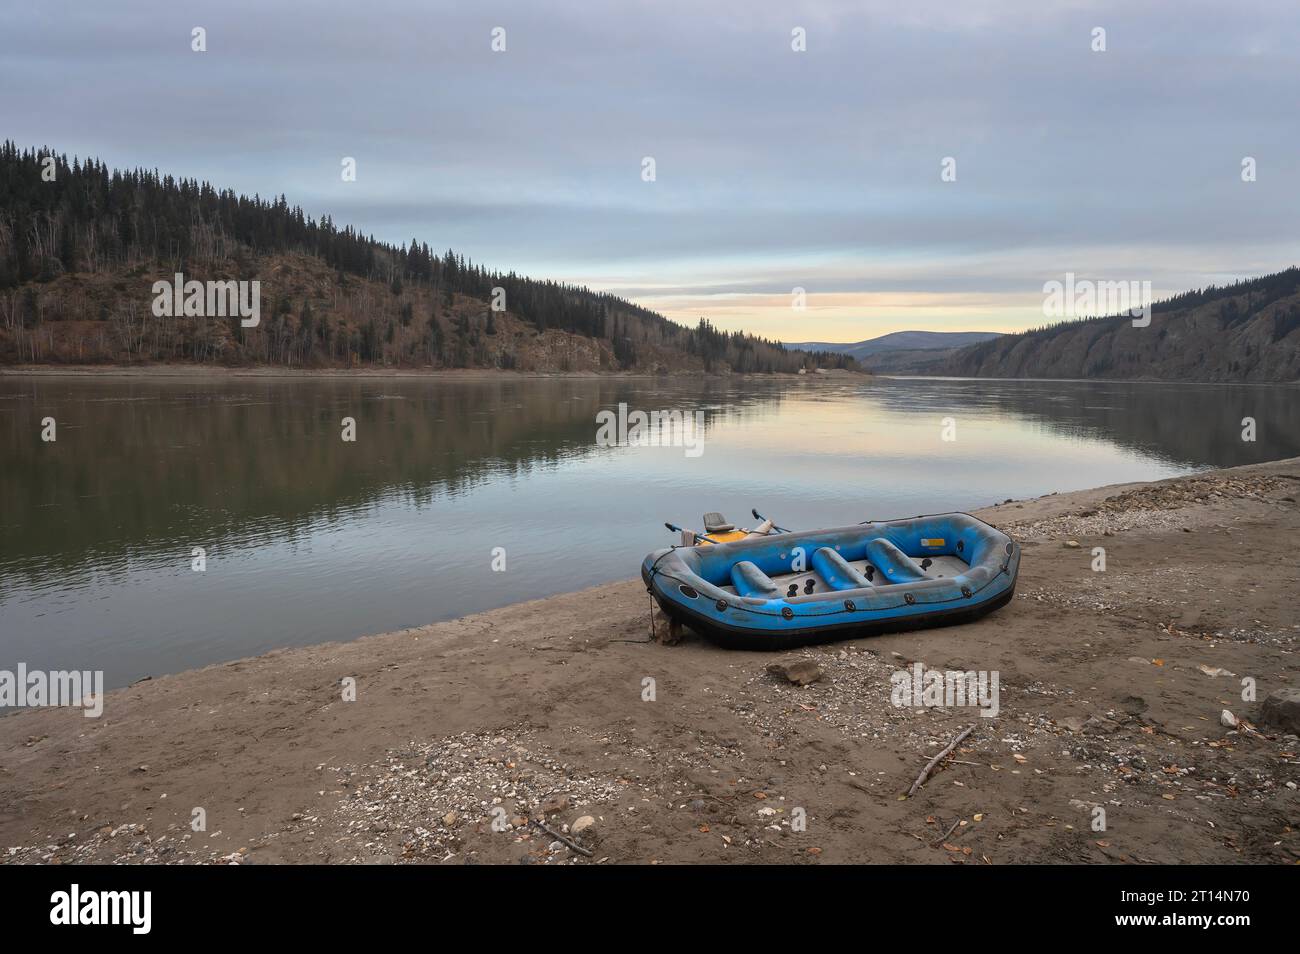 Morning view of an inflatable raft on the shore of the Yukon River at Dawson City, Yukon, Canada Stock Photo